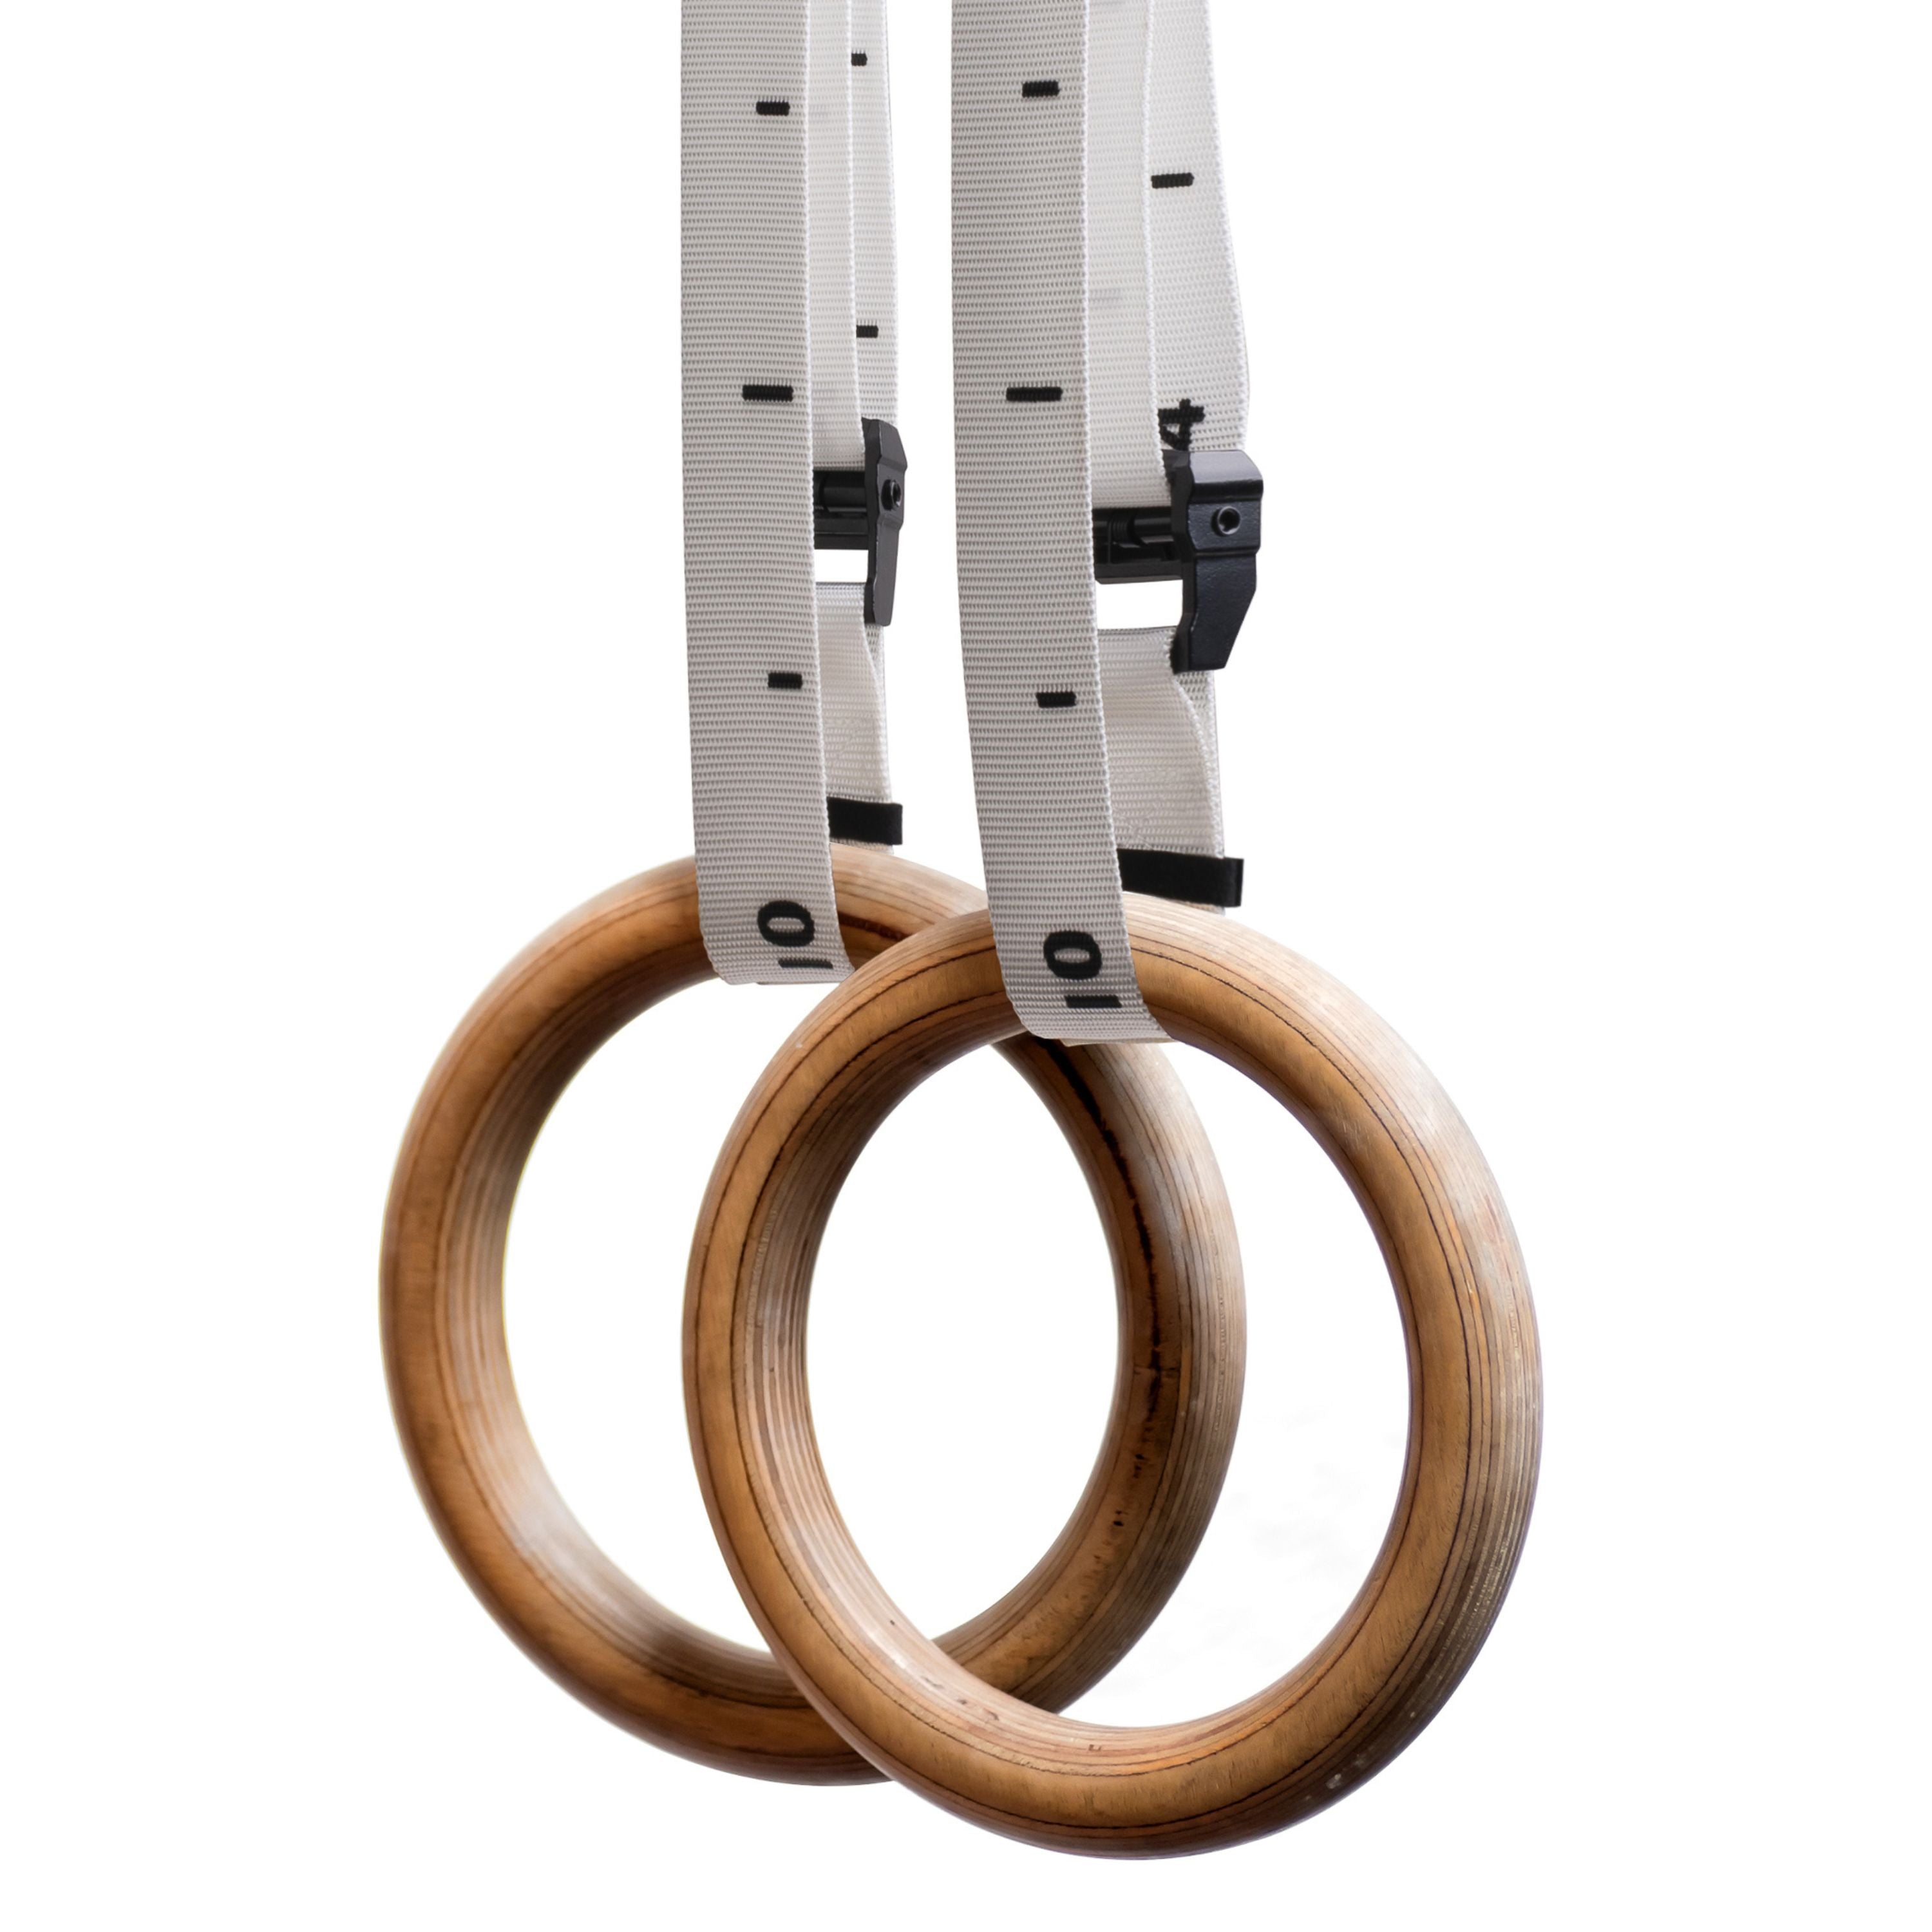 Serrano 32mm Wooden Gymnastic Rings Olympic Gym Rings Strength Training |  Harvey Norman